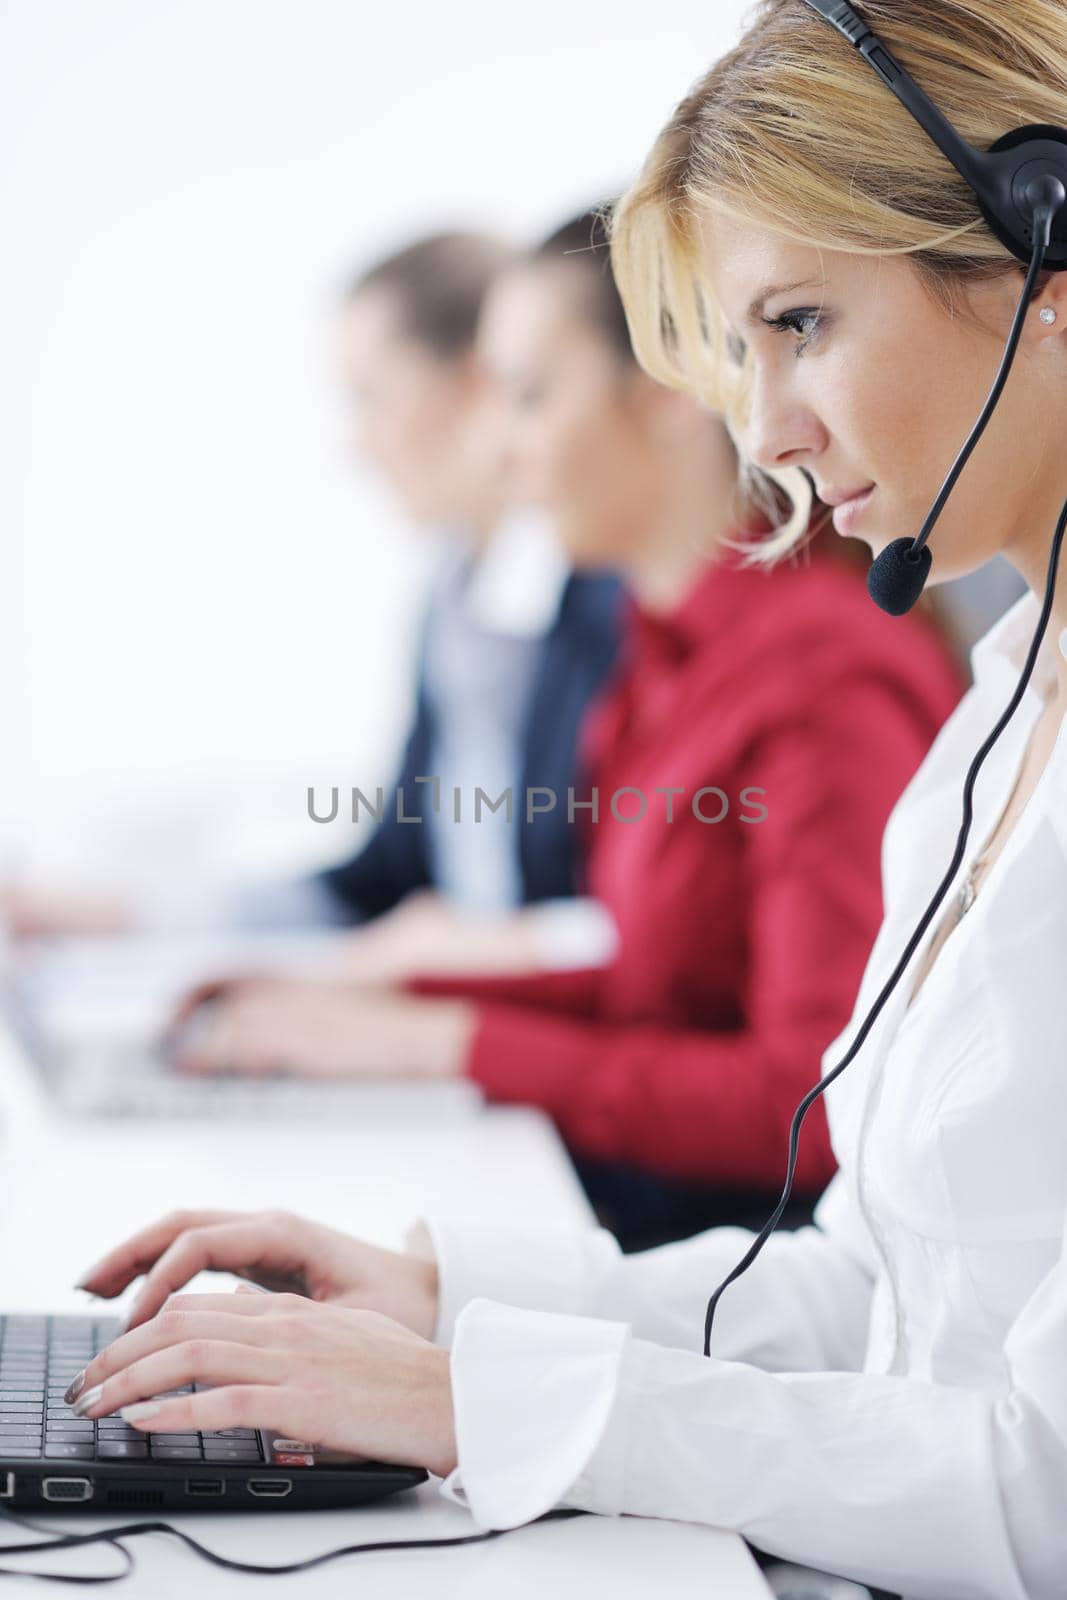 Pretty young business woman group with headphones smiling at you against white background